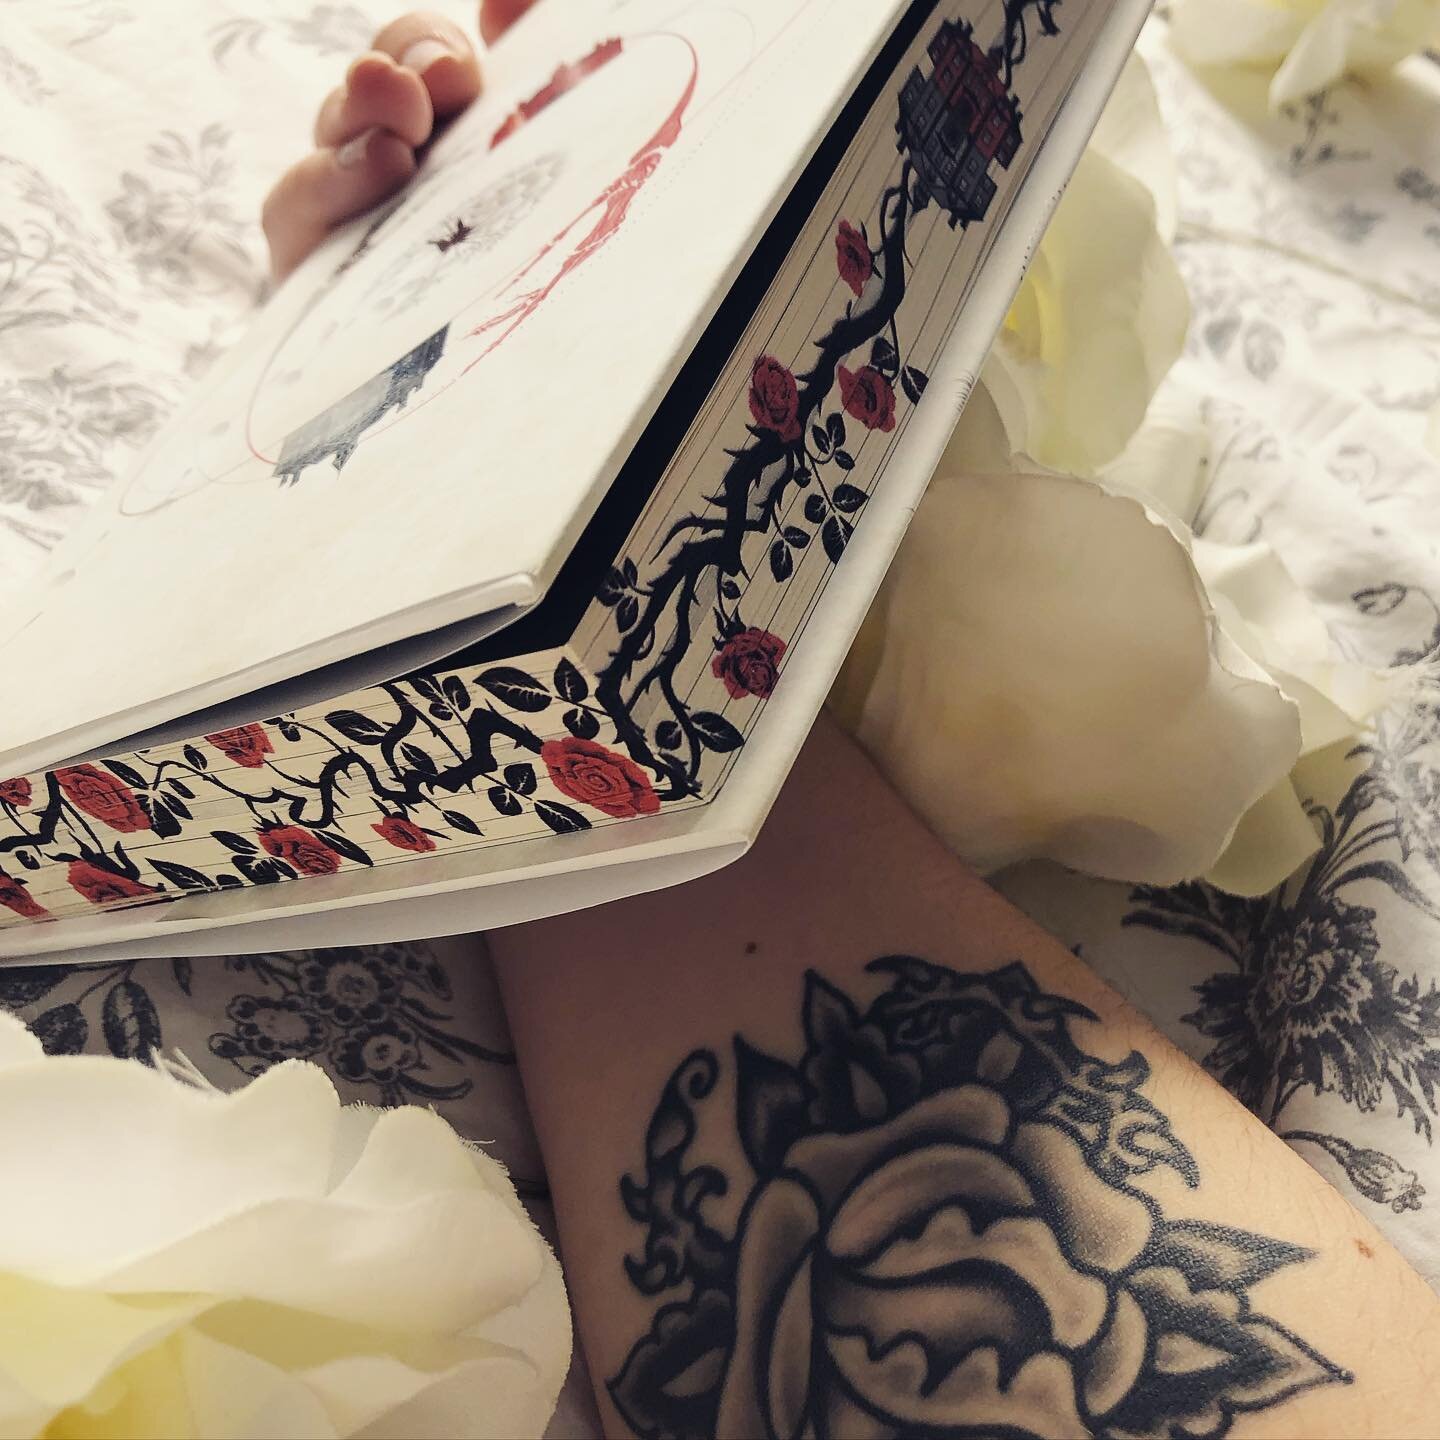 🥀𝐆𝐀𝐋𝐋𝐀𝐍𝐓🥀⁣
⁣
I saw the edging on Gallant, and it immediately reminded me of my traditional rose &ndash; I think it&rsquo;s the thorns that did it.⁣ Is matching book covers to tattoos a thing? It is now, anyway&hellip; 
⁣
I&rsquo;m not sure o